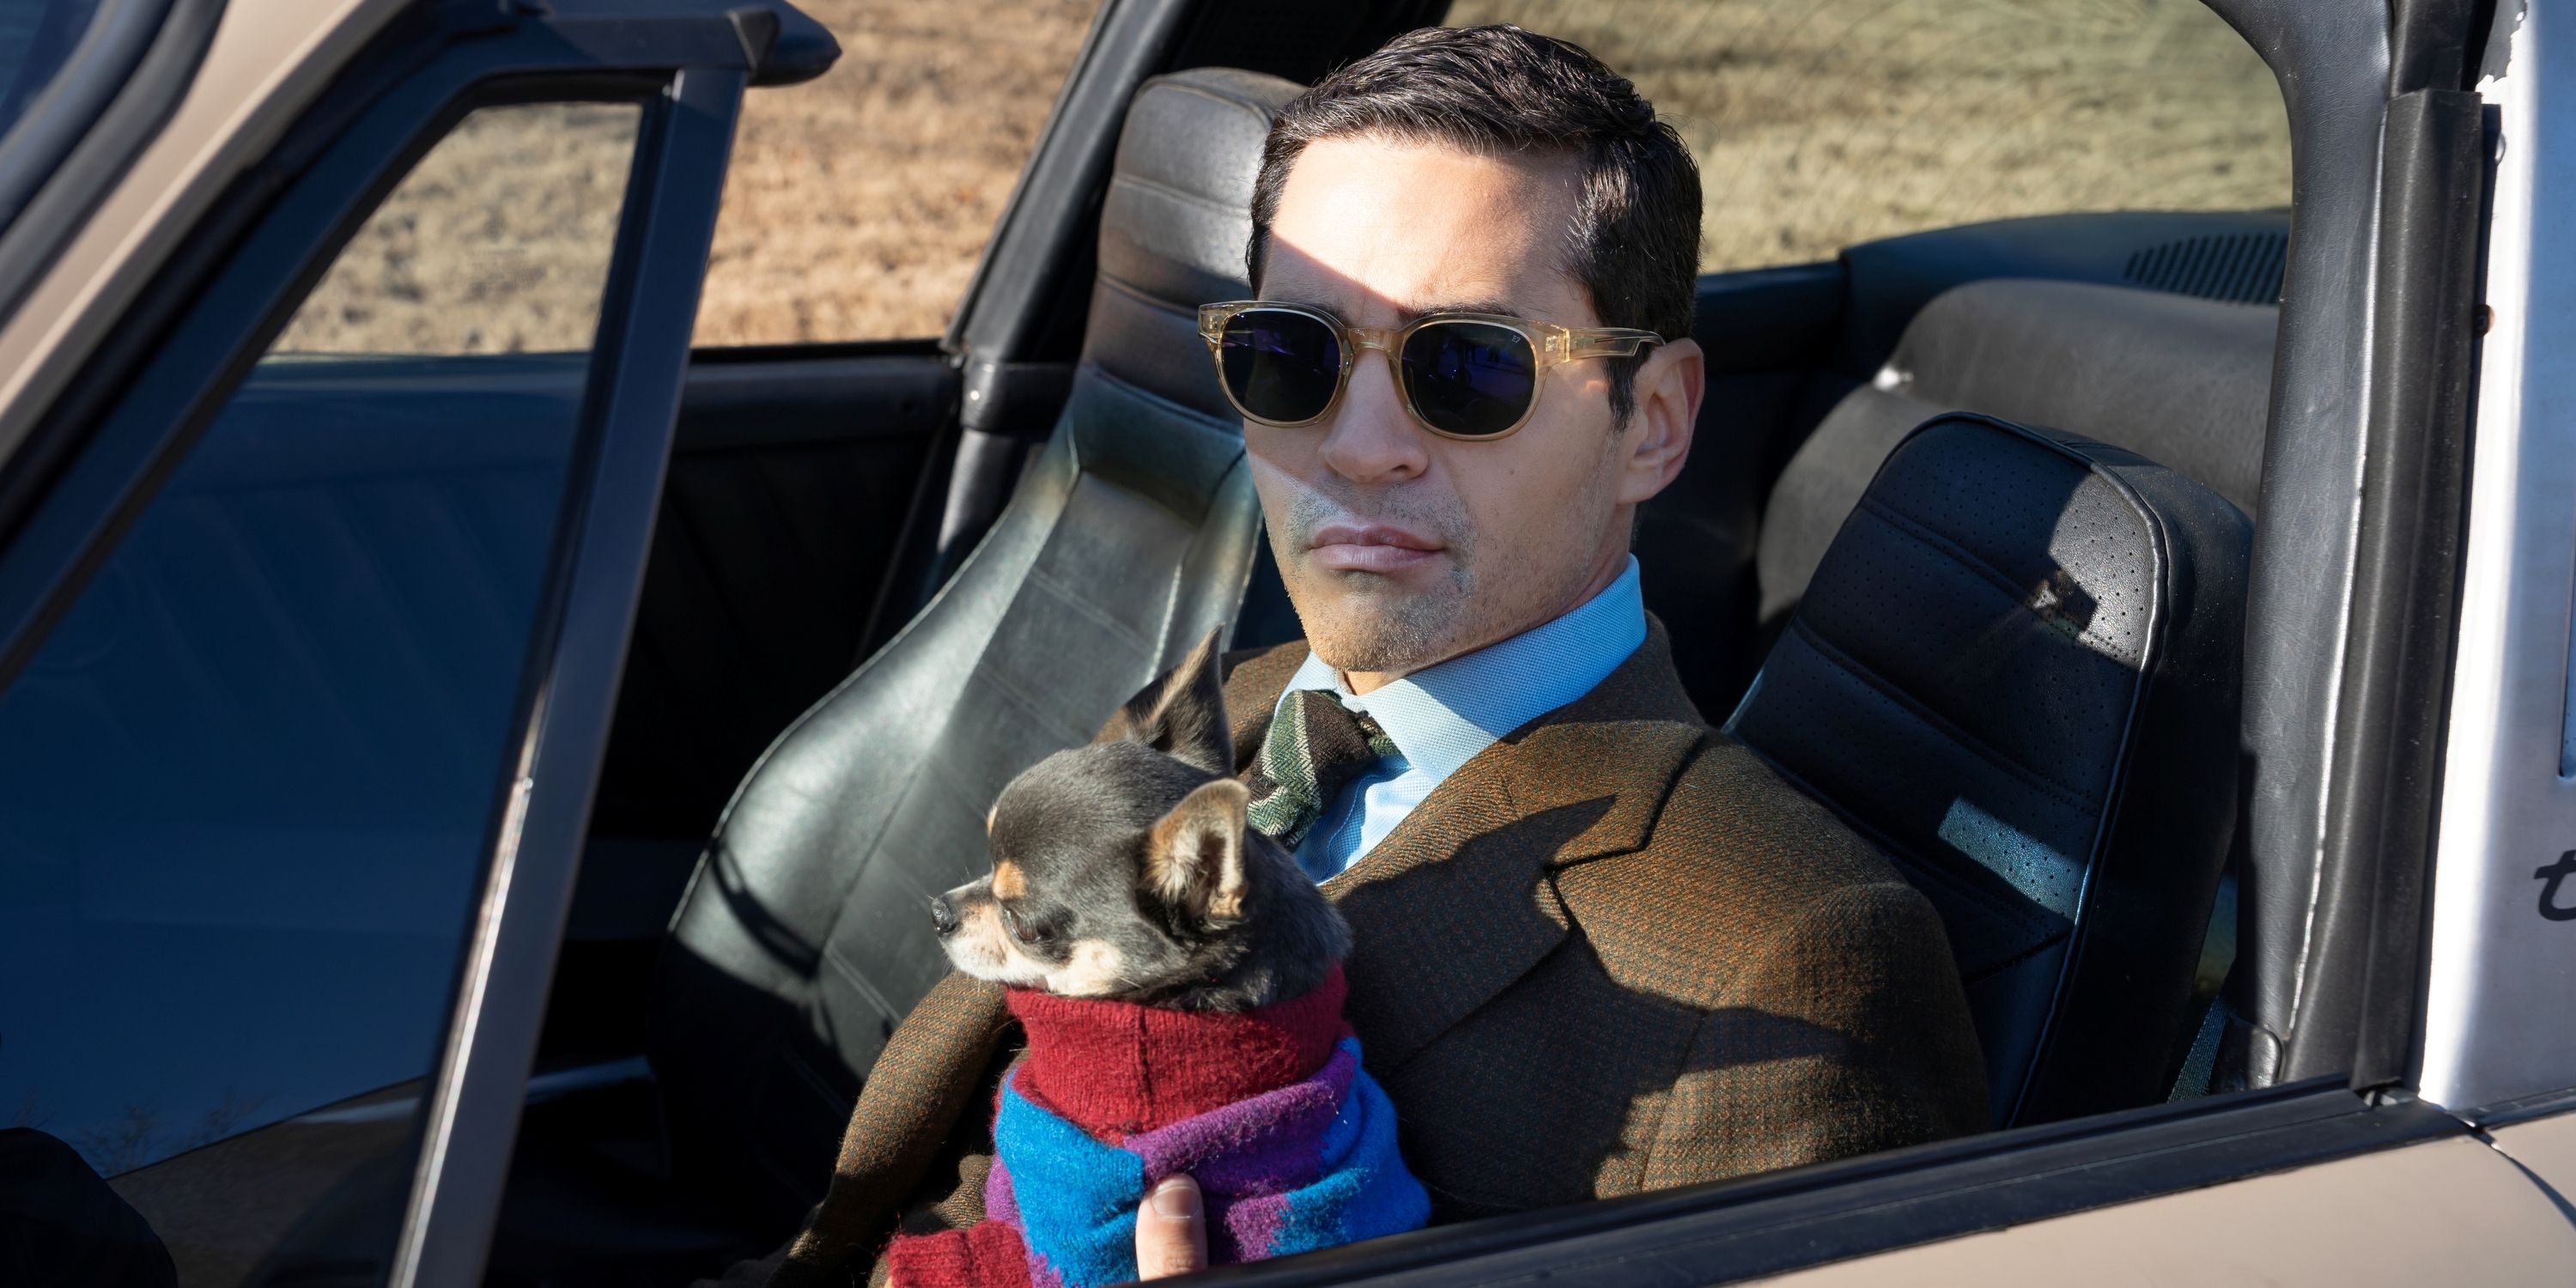 Ramón Rodríguez as Will Trent and Belle the dog as Betty in Episode 1 of Season 2 of ABC's Will Trent